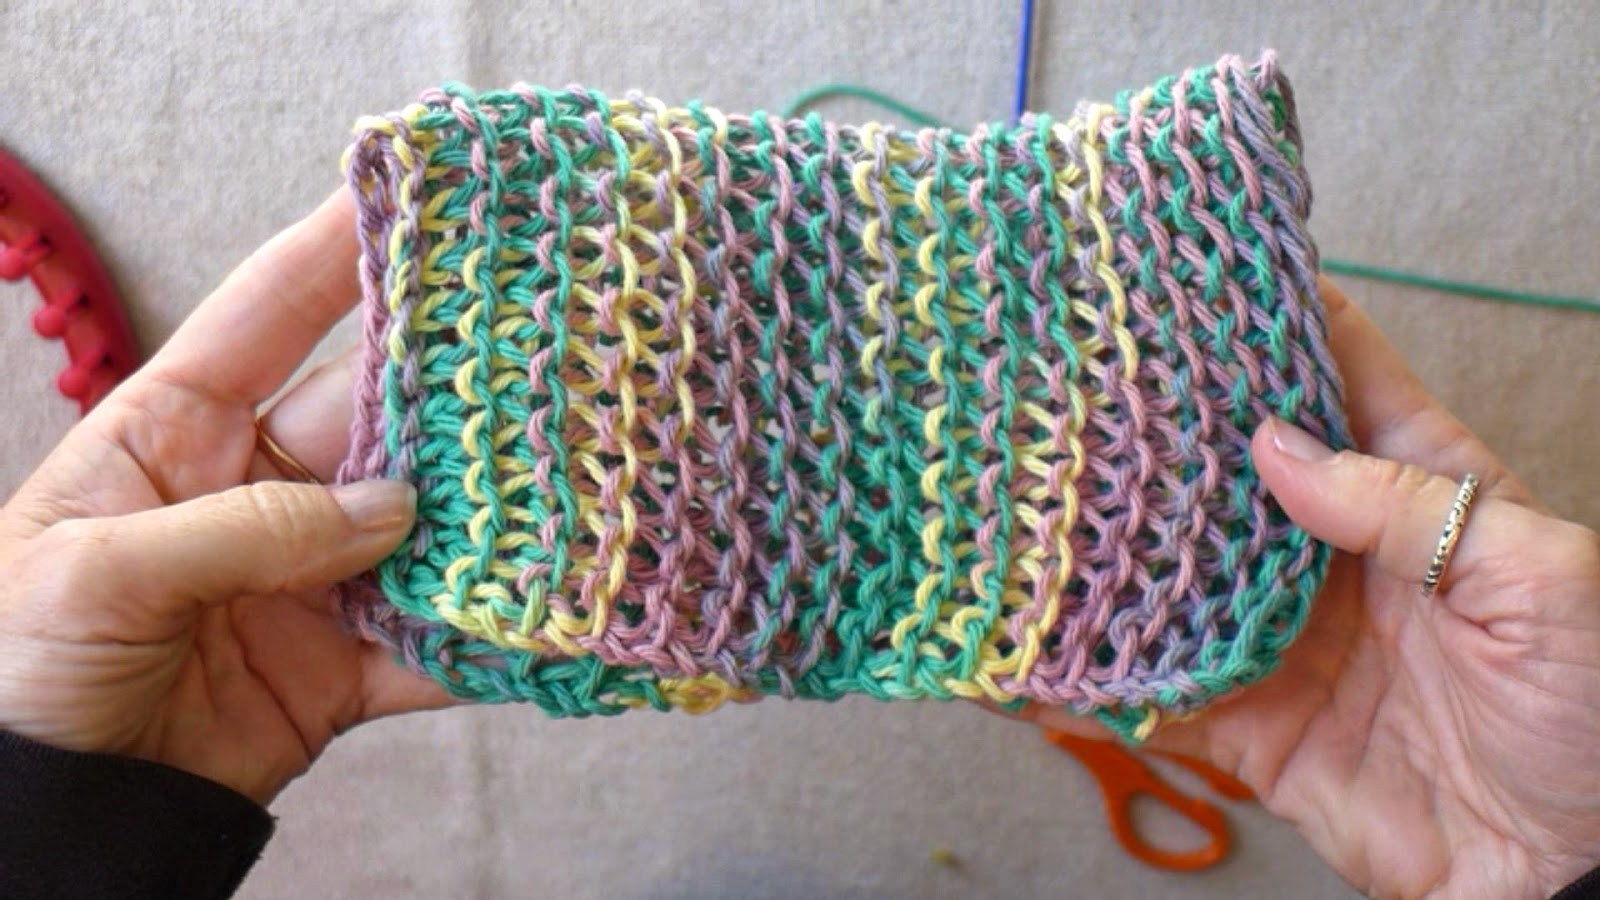 Easymeworld Learn The Basic Stitches For Loom Knitting